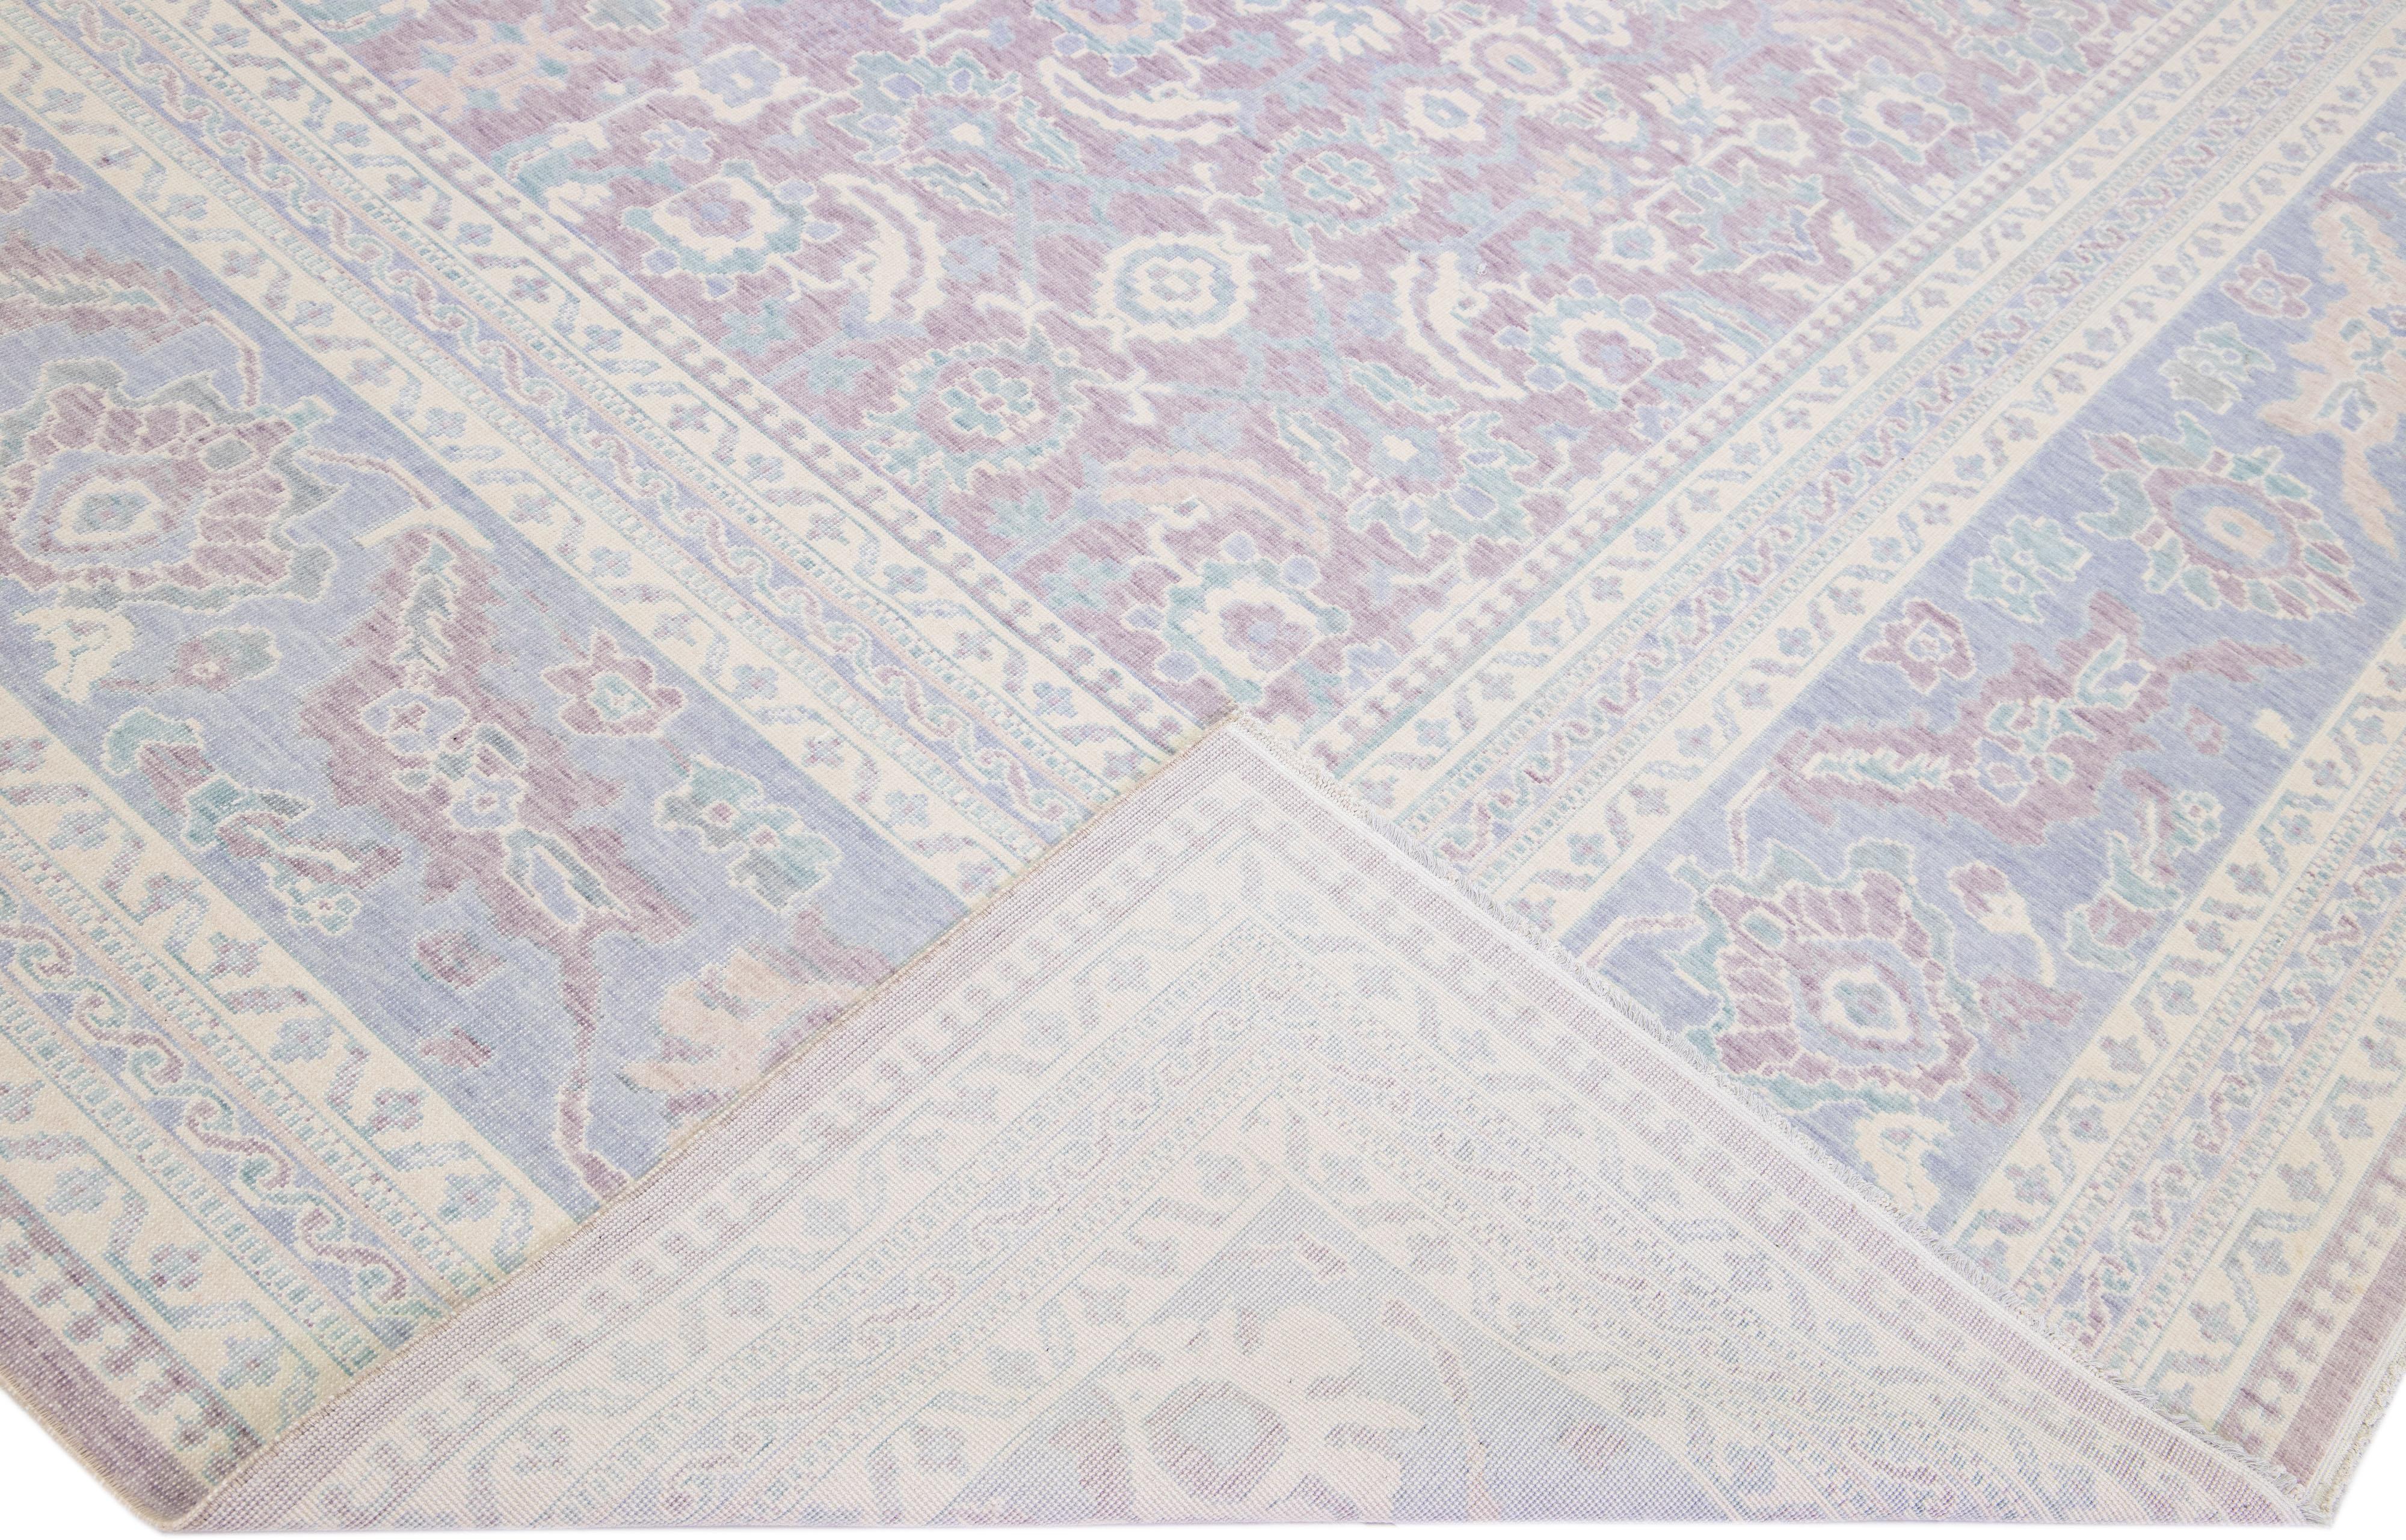 Beautiful modern Turkish hand-knotted wool rug with a light purple field. This piece has blue and beige accents in a gorgeous all-over floral pattern design.

This rug measures: 9'11